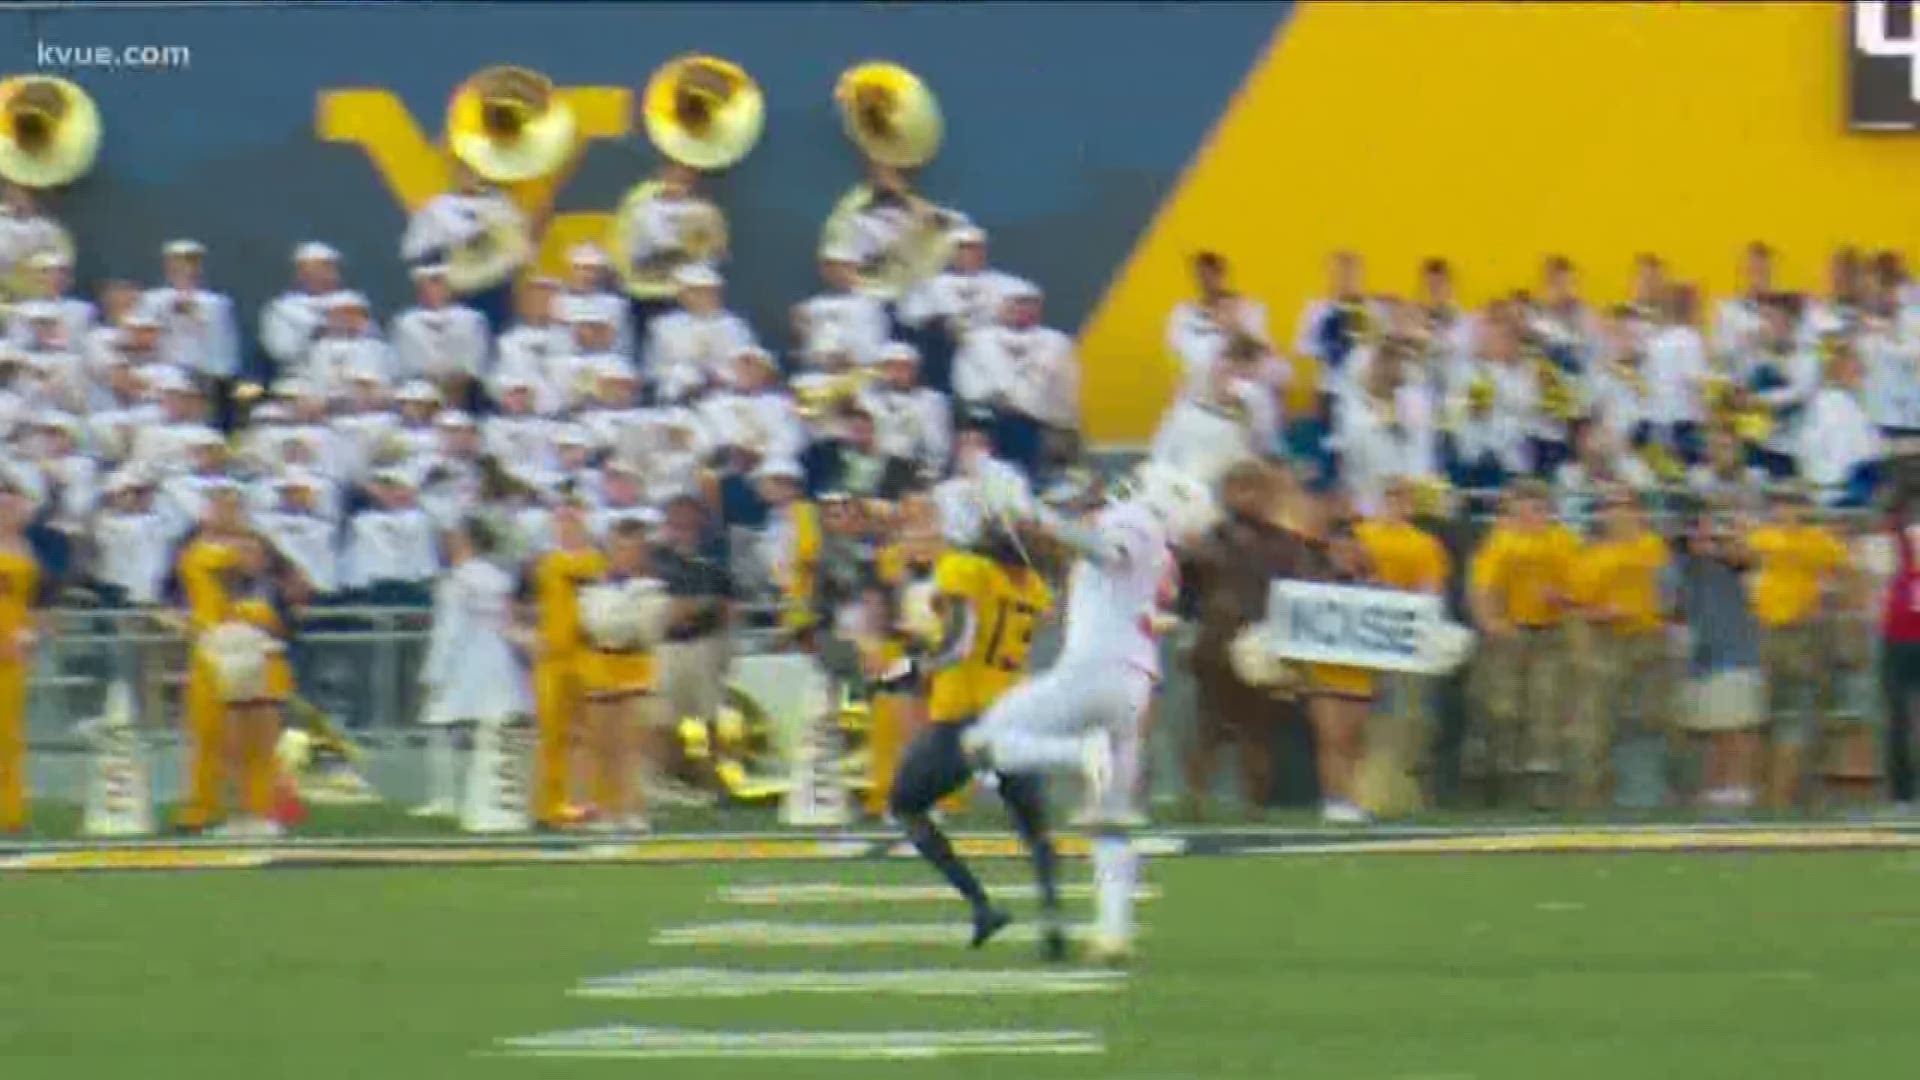 Texas Longhorns defensive back D'Shawn Jamison made one of the plays of the year when he snagged a one-handed interception against West Virginia.